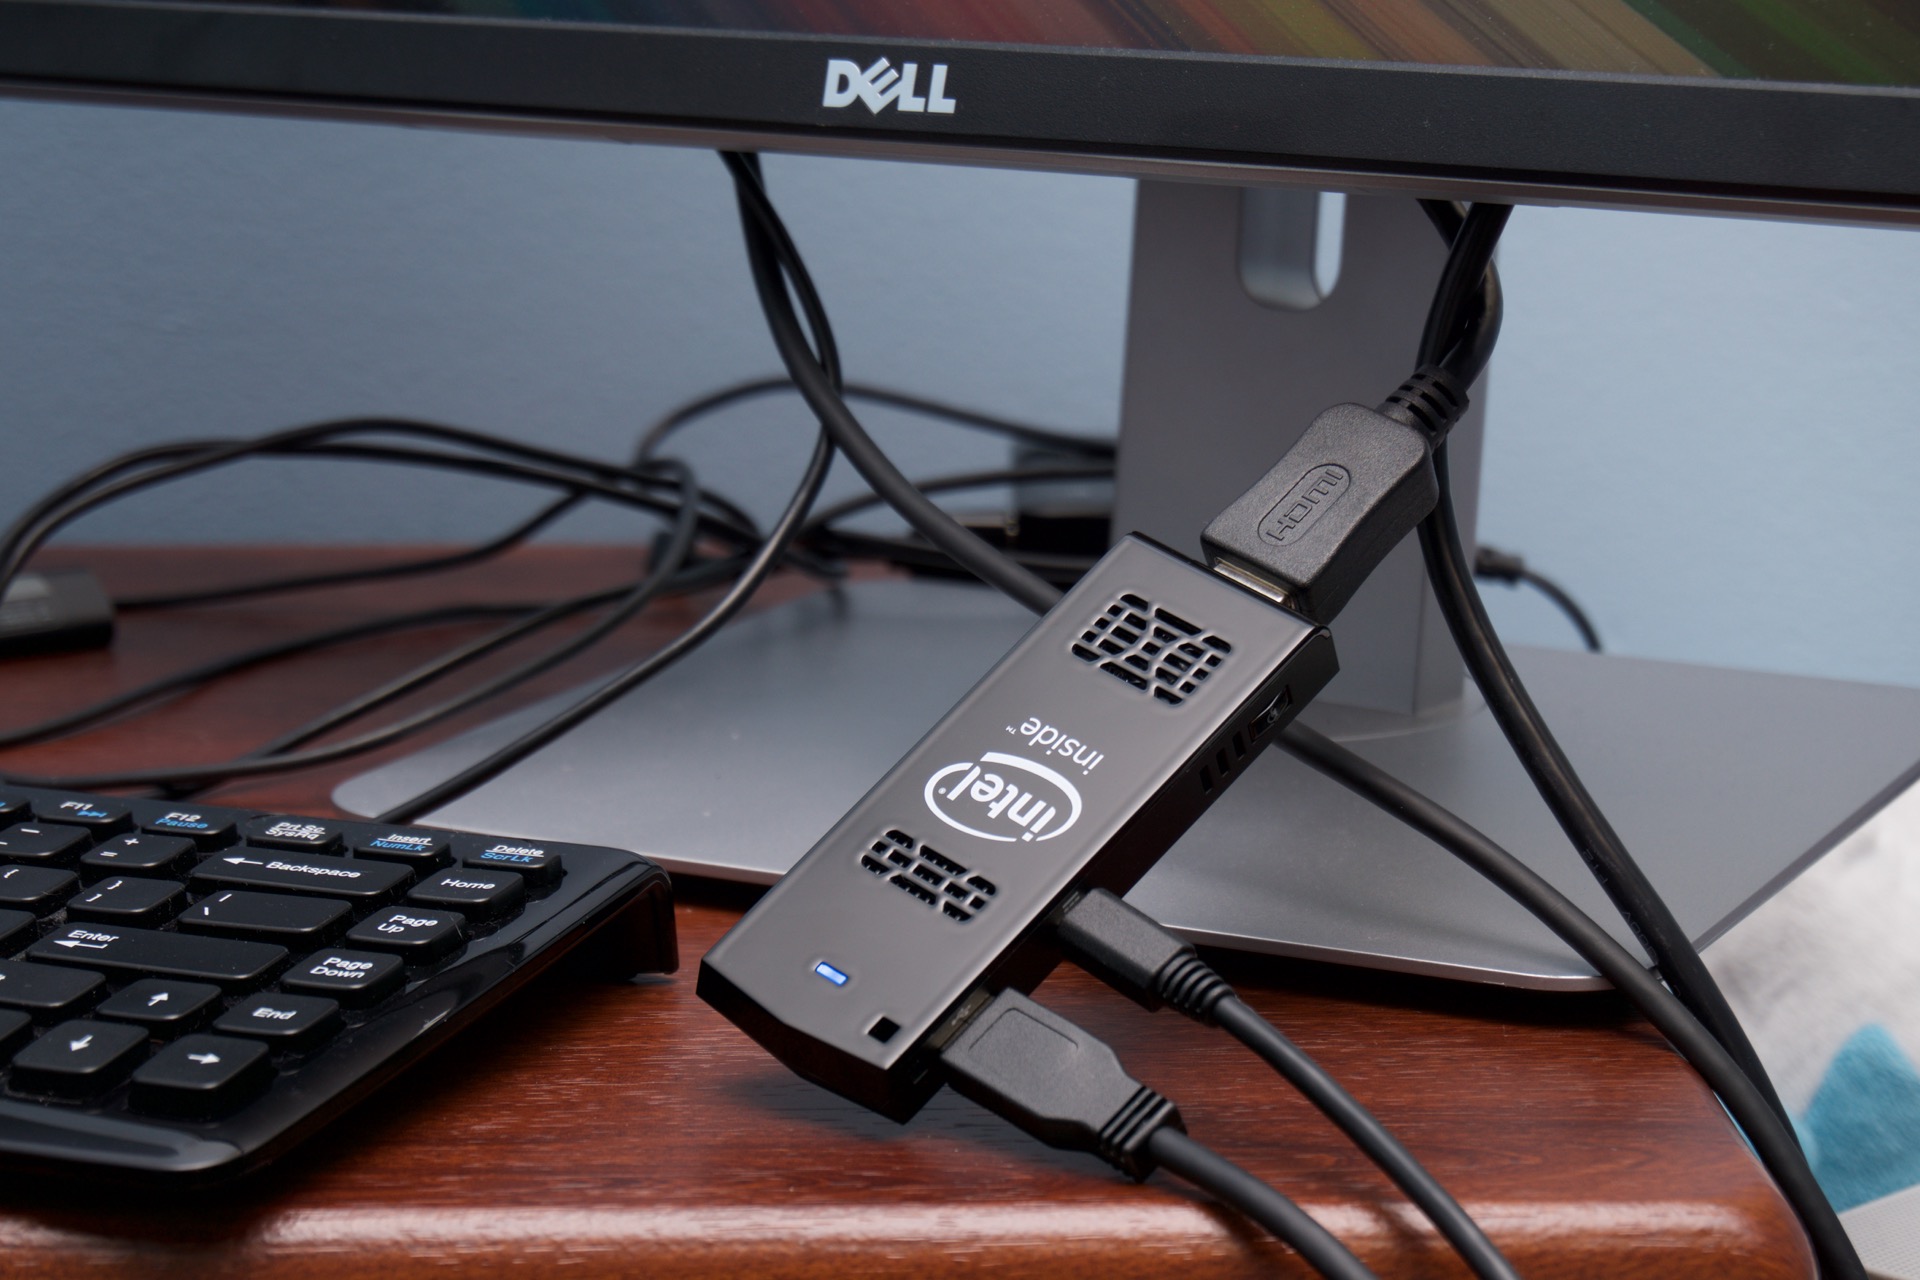 Intel's Compute Stick: A full PC that's tiny in size (and performance)